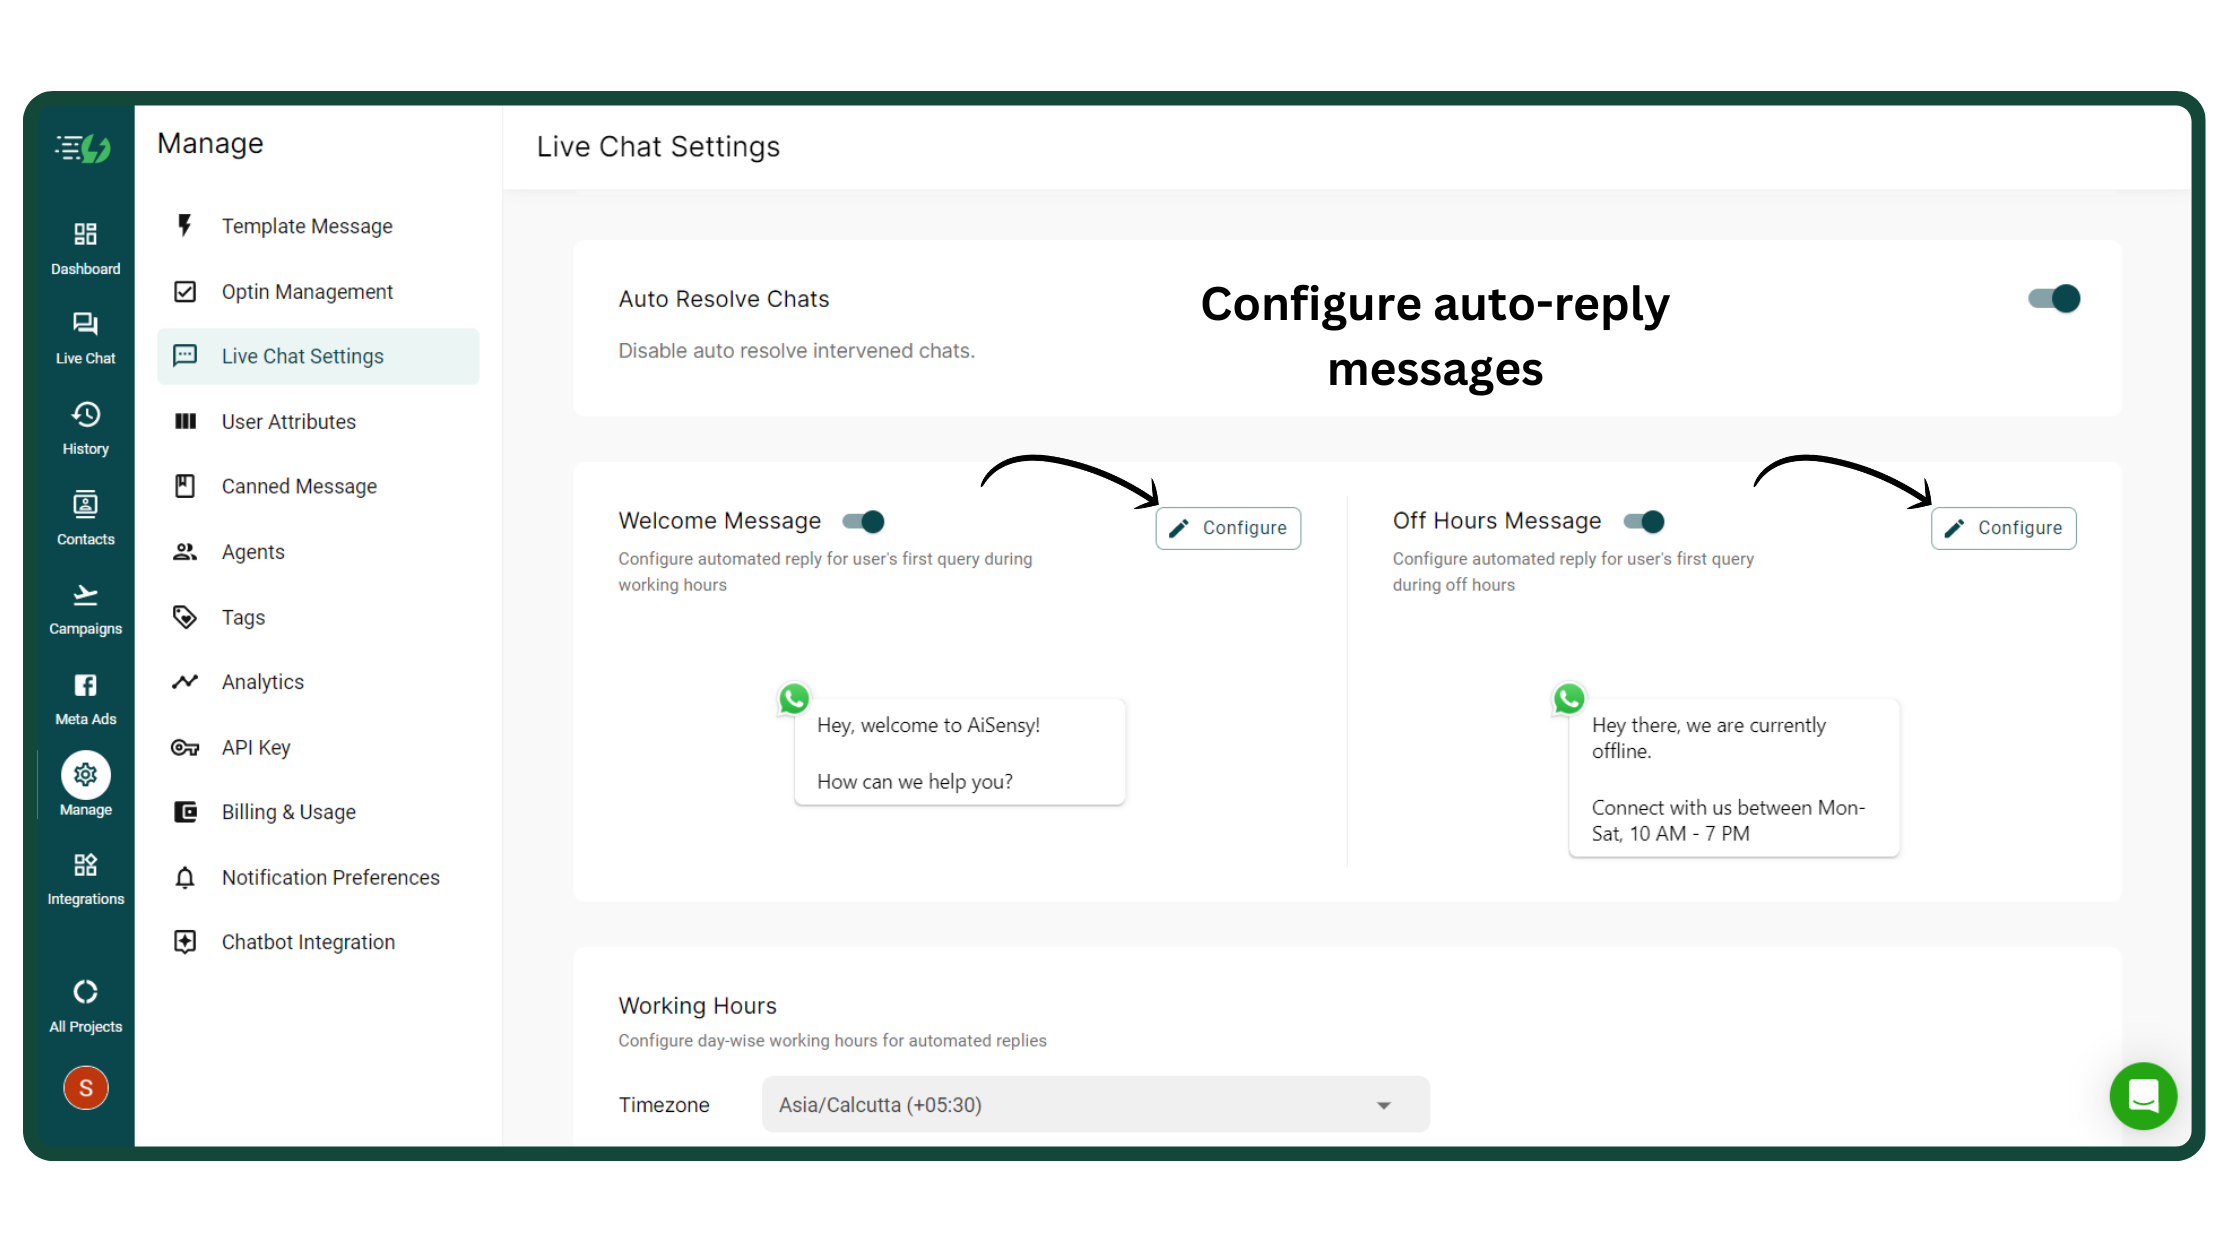 Configure Welcome & Off-hours message